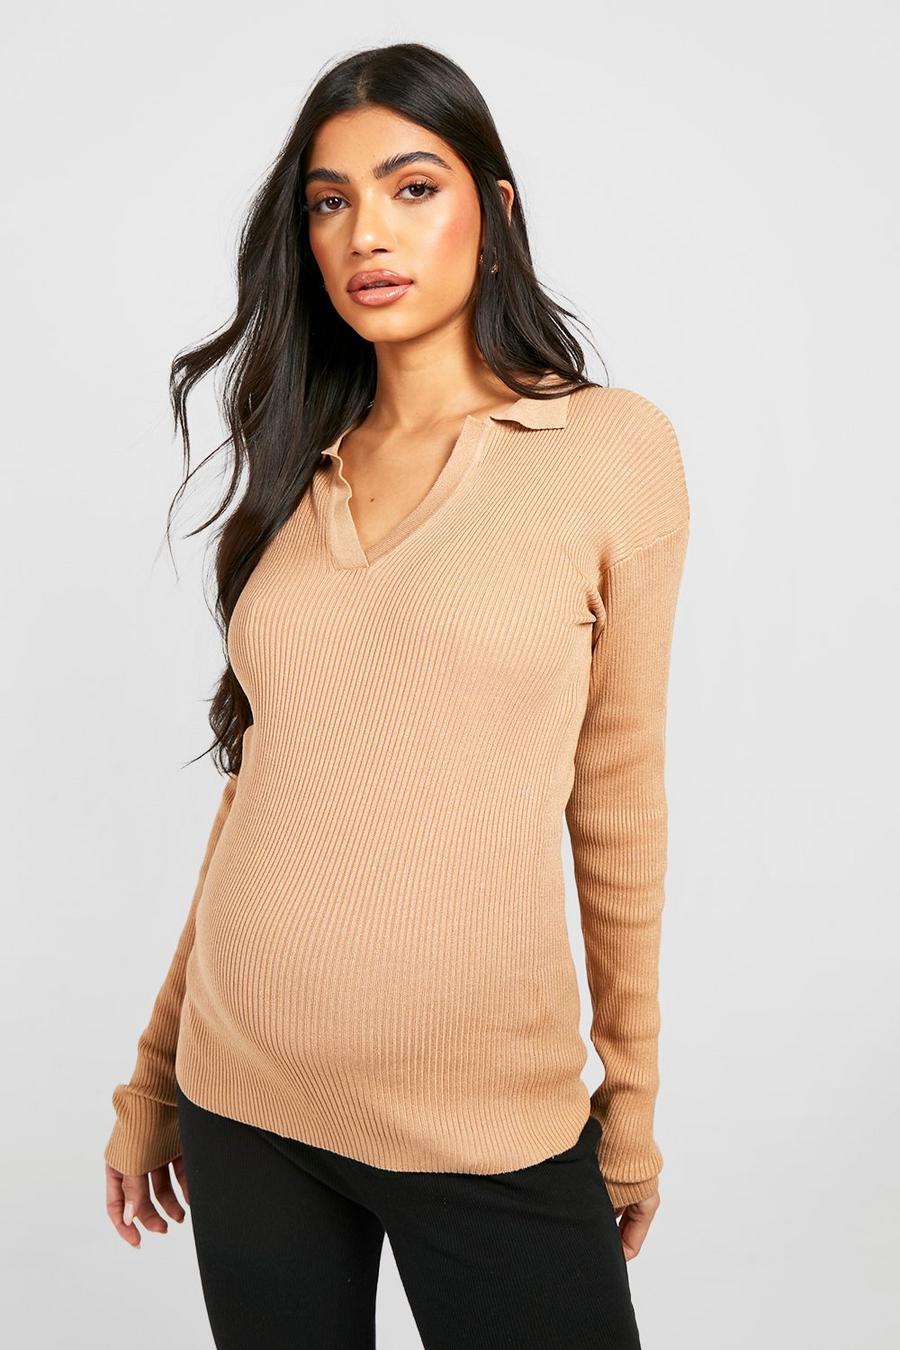 Toffee beige Maternity Collared Rib Knit Top